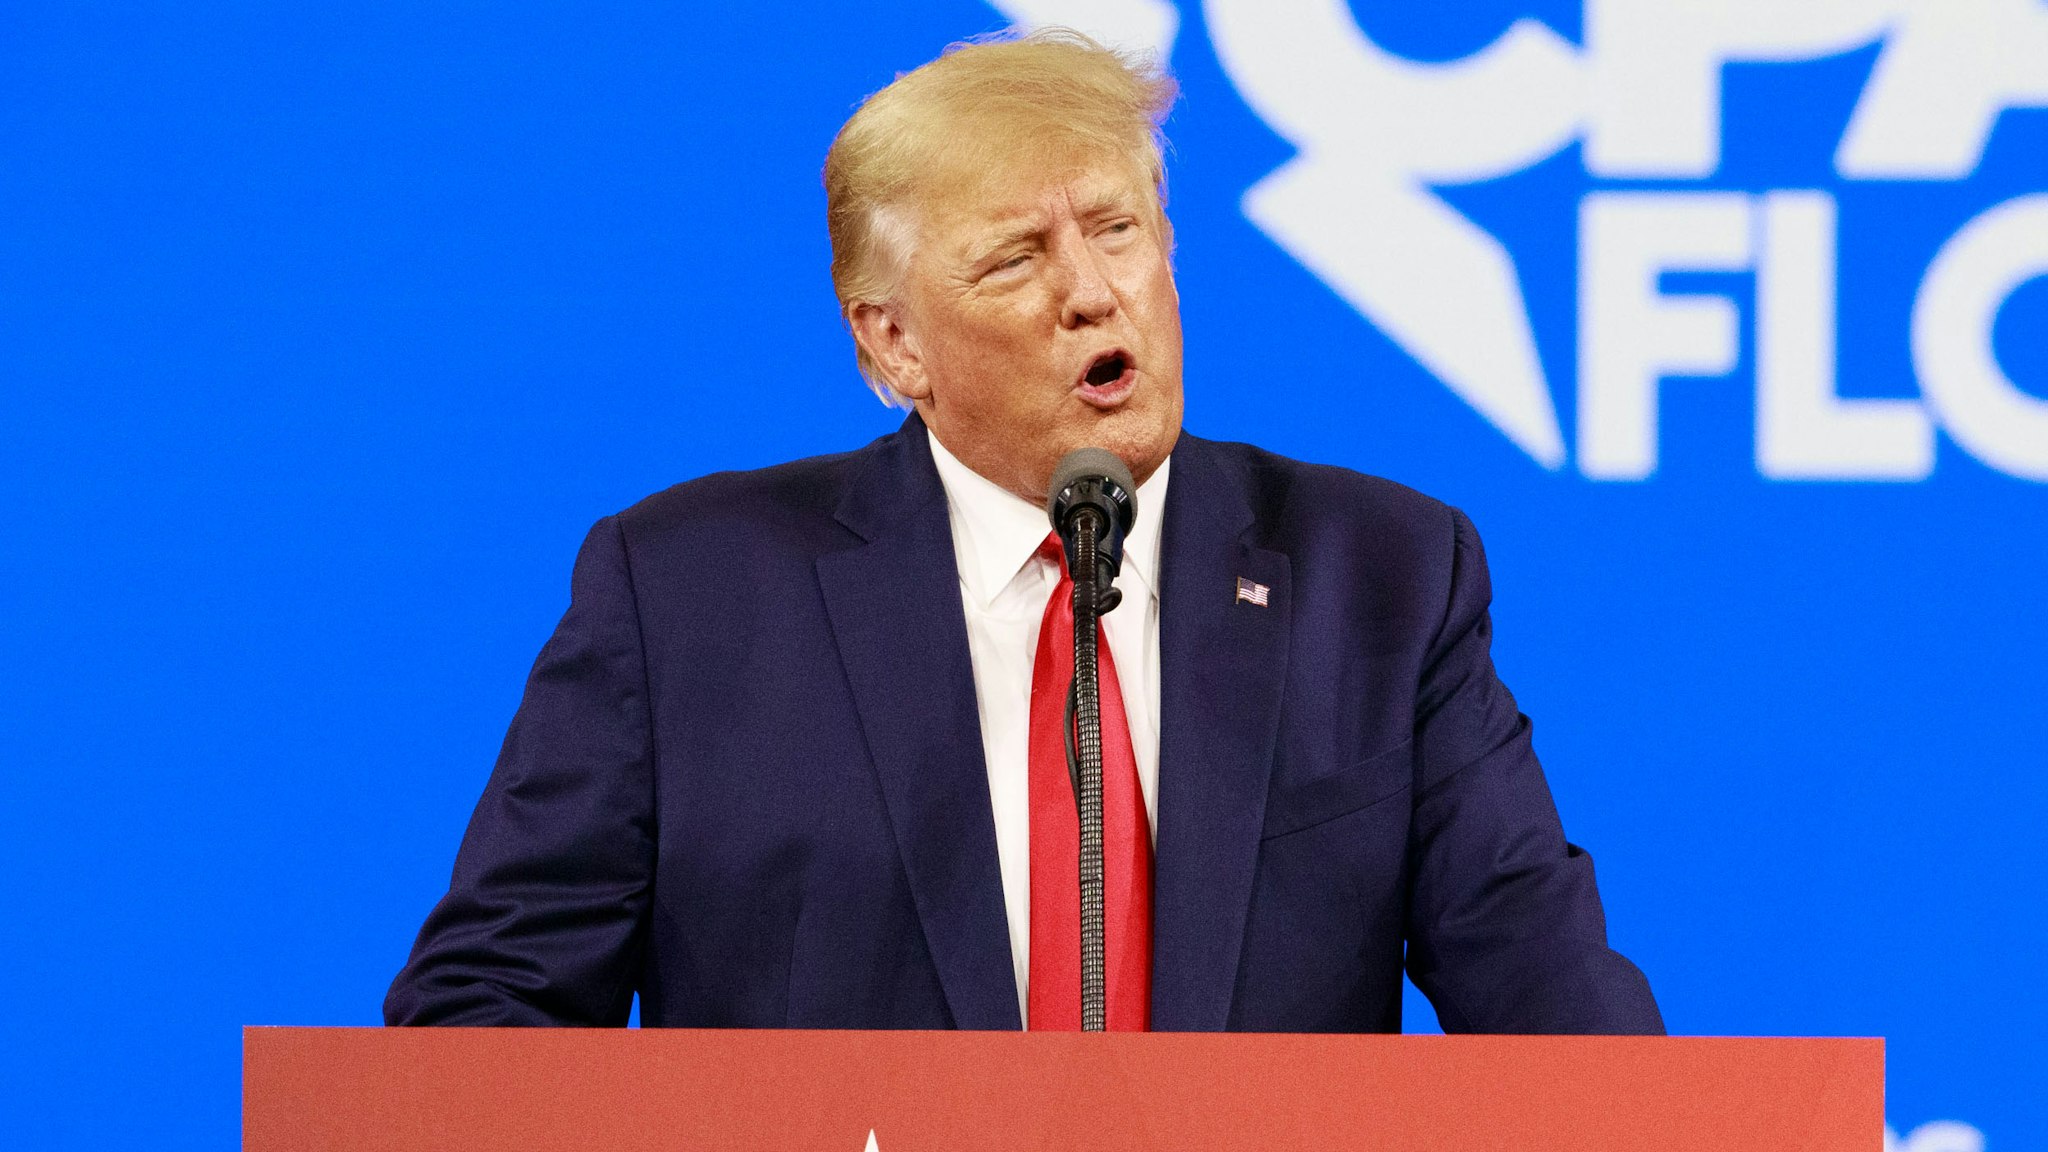 Former U.S. President Donald Trump speaks during the Conservative Political Action Conference (CPAC) in Orlando, Florida, U.S., on Saturday, Feb. 26, 2022. Launched in 1974, the Conservative Political Action Conference is the largest gathering of conservatives in the world.